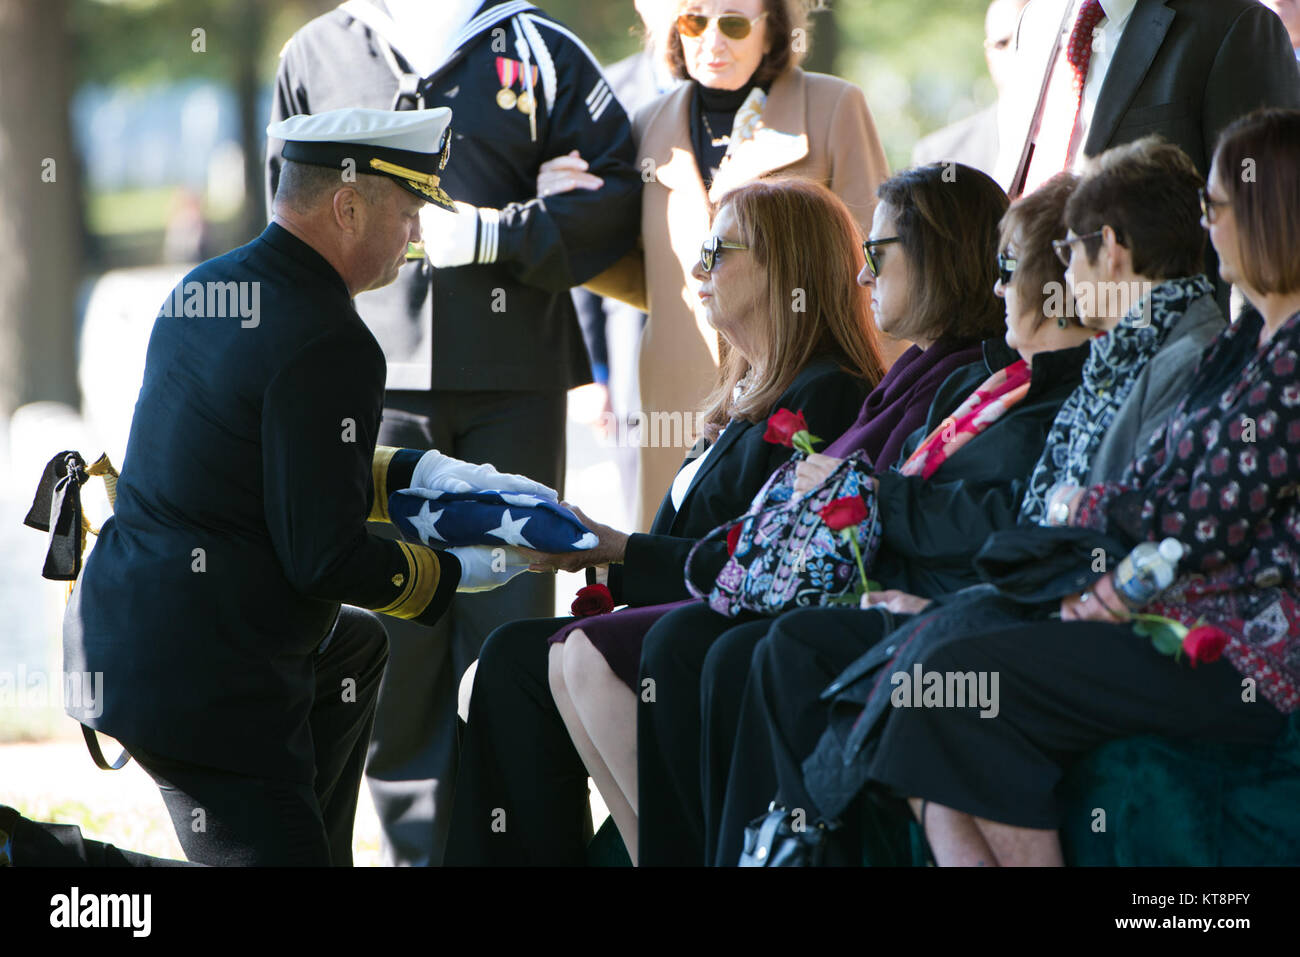 Katherine Kany receives the American flag during the graveside service for her uncle U.S. Navy Fireman 3rd Class John H. Lindsley, Oct. 25, 2016, in Section 60 of Arlington National Cemetery. Lindsley was assigned to the USS Oklahoma, which was moored at Ford Island, Pearl Harbor, when the ship was attacked by Japanese aircraft. The USS Oklahoma sustained multiple torpedo hits, which caused it to quickly capsize. The attack on the ship resulted in 429 casualties, including Lindsley. (U.S. Army photo by Rachel Larue/Arlington National Cemetery/released) Stock Photo